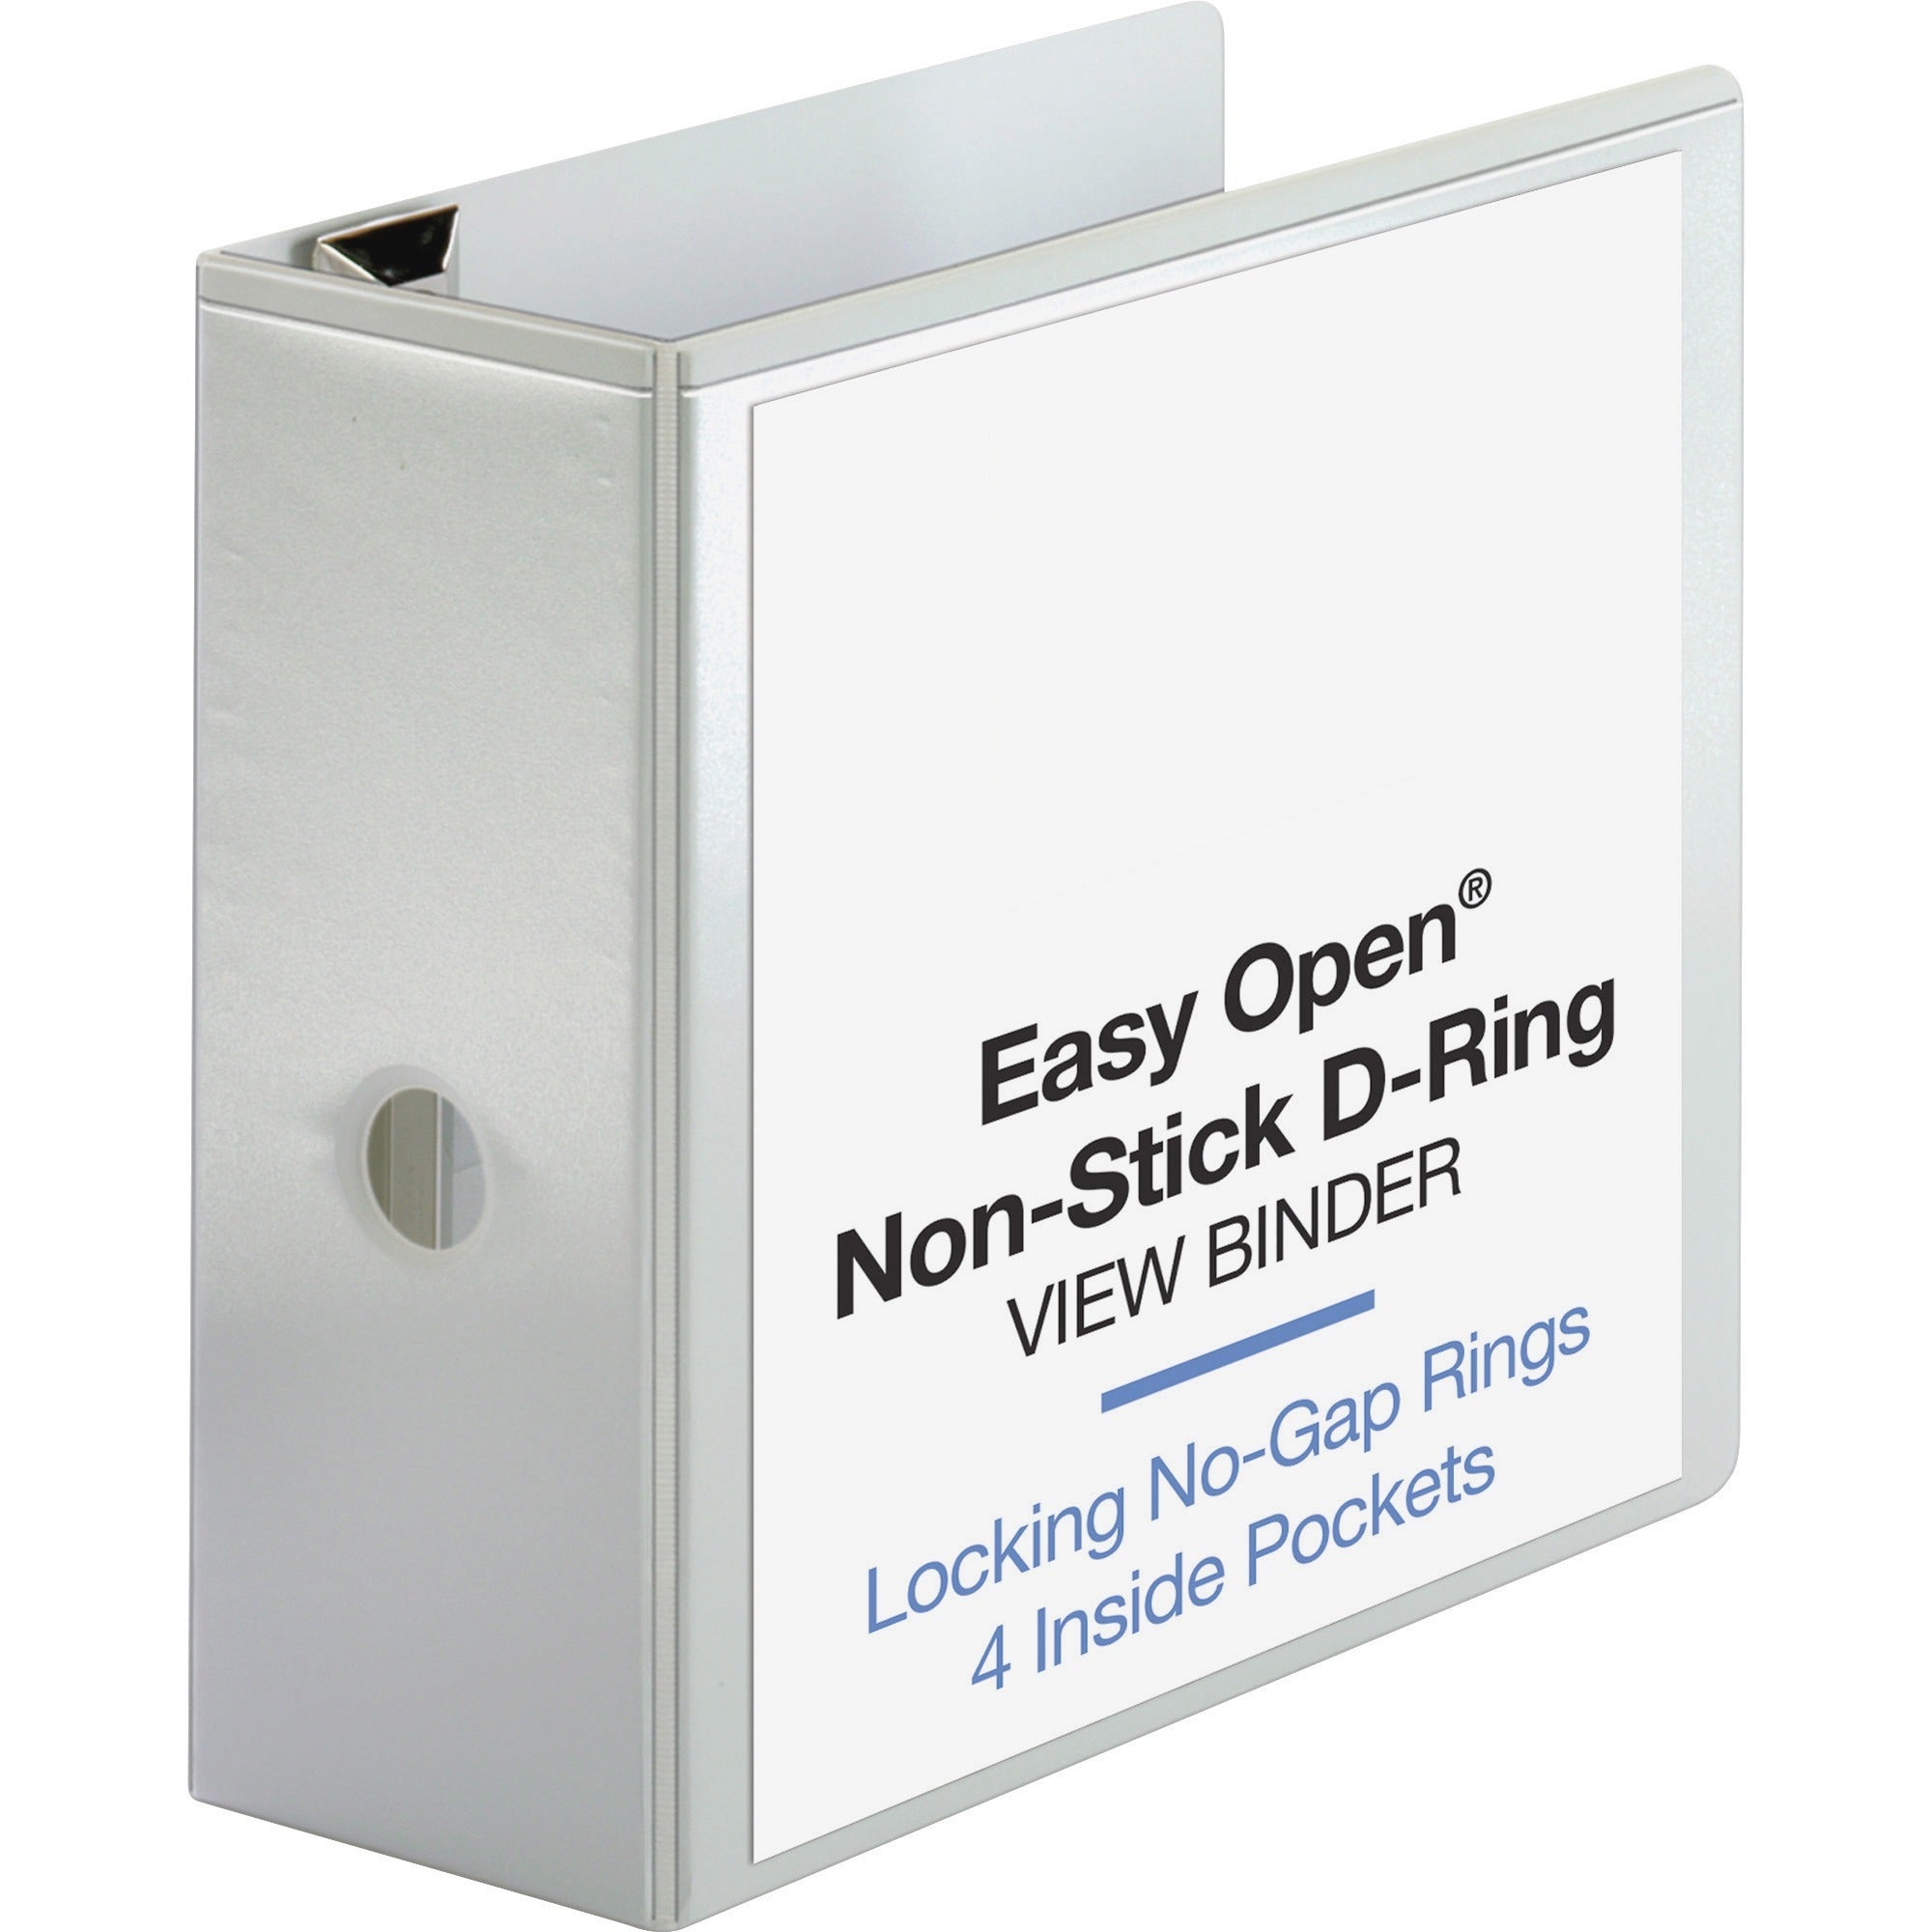 business-source-locking-d-ring-view-binder-5-binder-capacity-letter-8-1-2-x-11-sheet-size-925-sheet-capacity-d-ring-fasteners-4-inside-front-&-back-pockets-polypropylene-covered-chipboard-white-recycled-locking-ring-non-gl_bsn26965 - 1